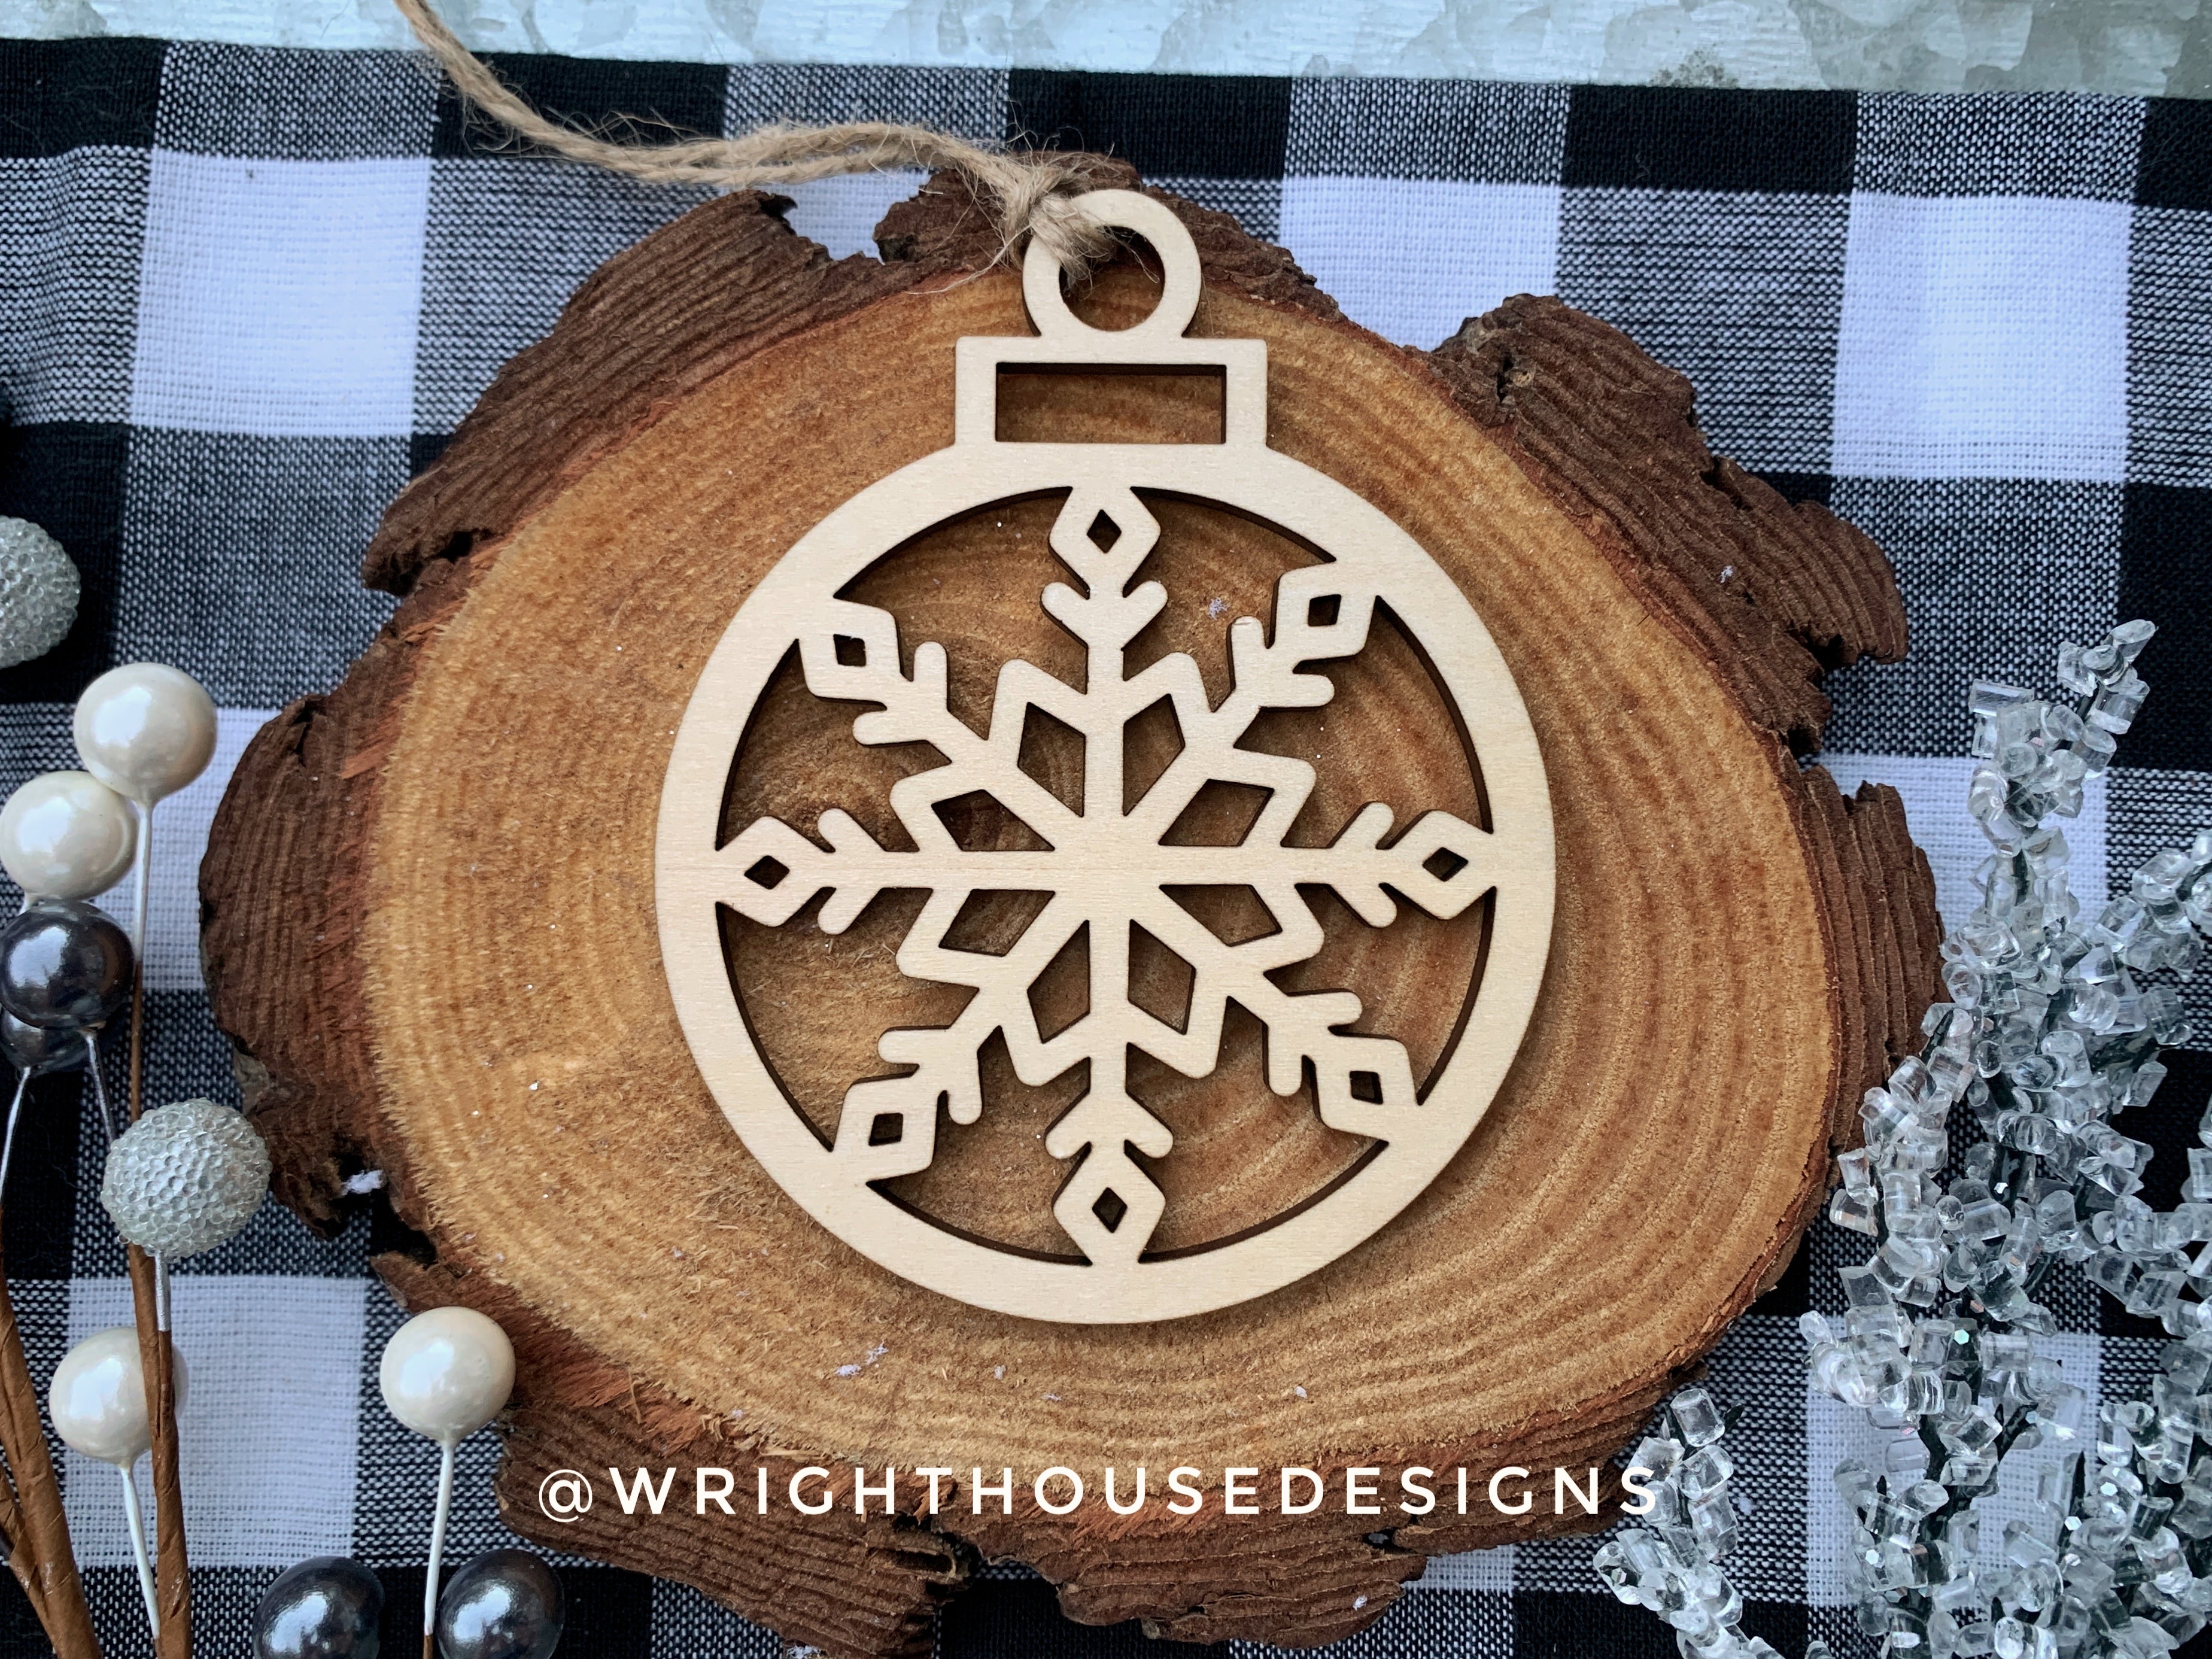 Wooden Snowflakes - Christmas Tree Ornaments - Winter Decorations